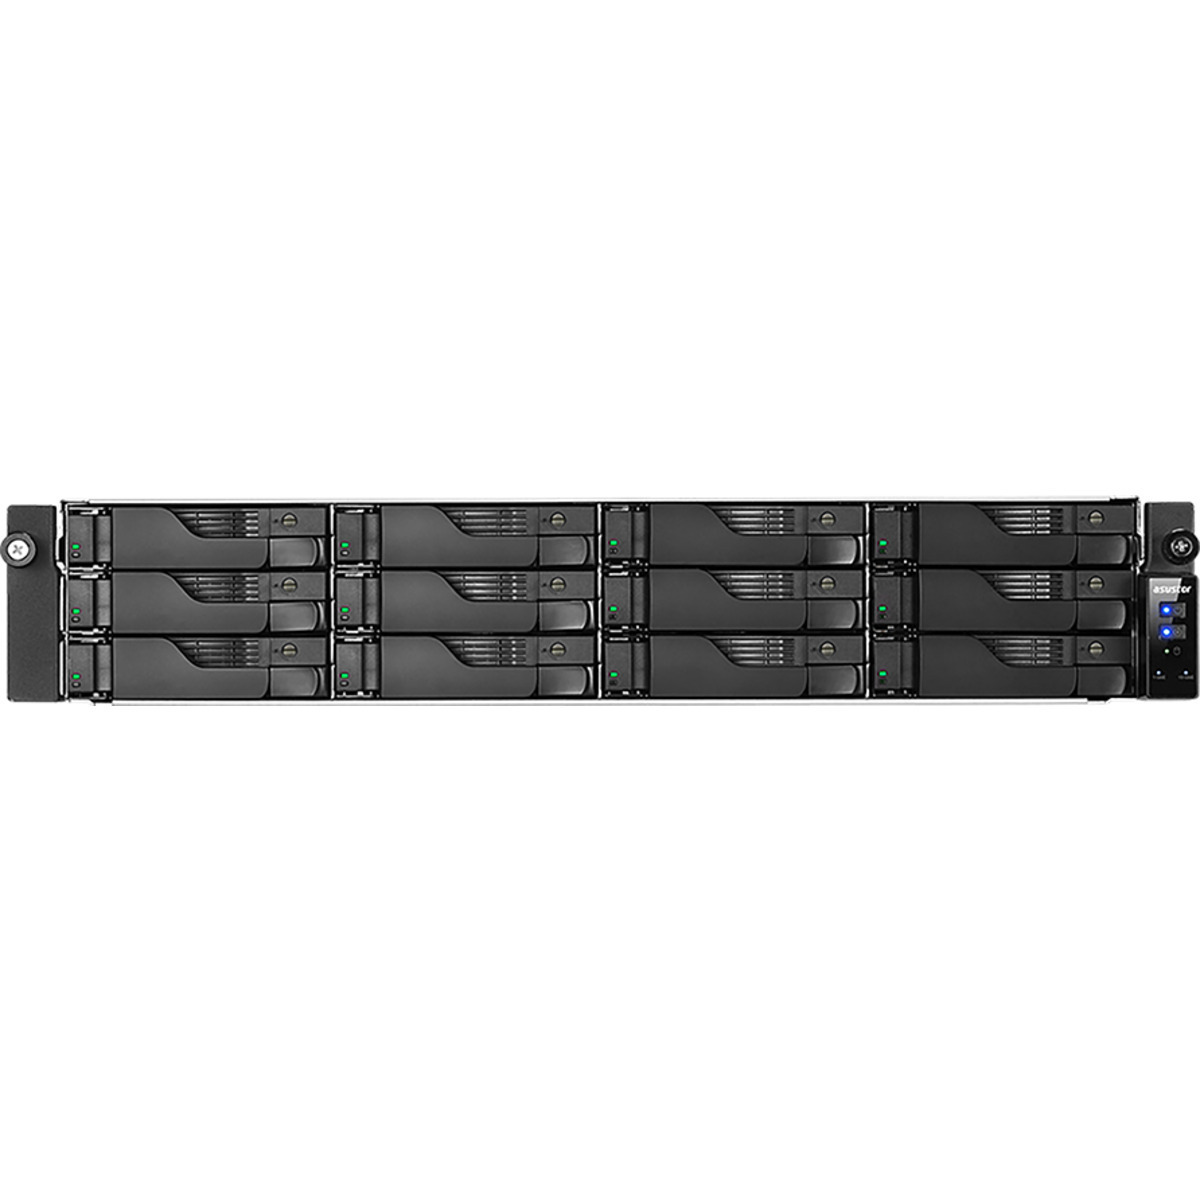 ASUSTOR LOCKERSTOR 12RD AS6512RD 12tb 12-Bay RackMount Multimedia / Power User / Business NAS - Network Attached Storage Device 12x1tb Samsung 870 EVO MZ-77E1T0BAM 2.5 560/530MB/s SATA 6Gb/s SSD CONSUMER Class Drives Installed - Burn-In Tested - FREE RAM UPGRADE LOCKERSTOR 12RD AS6512RD